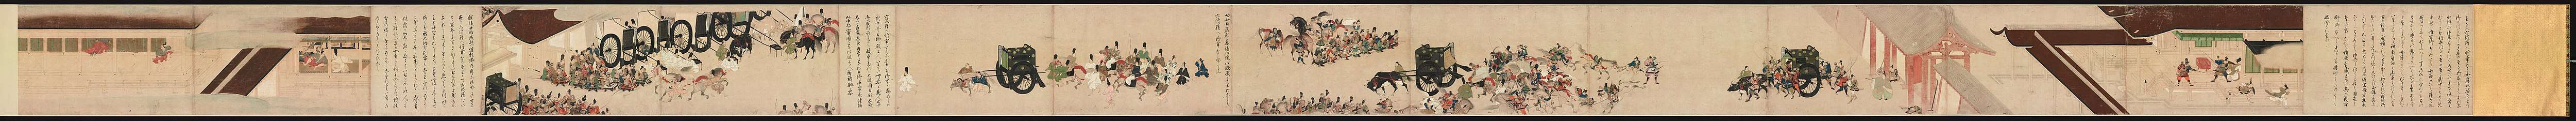 Illustrated Tale of the Heiji Civil War: Scroll of the Imperial Visit to Rokuhara